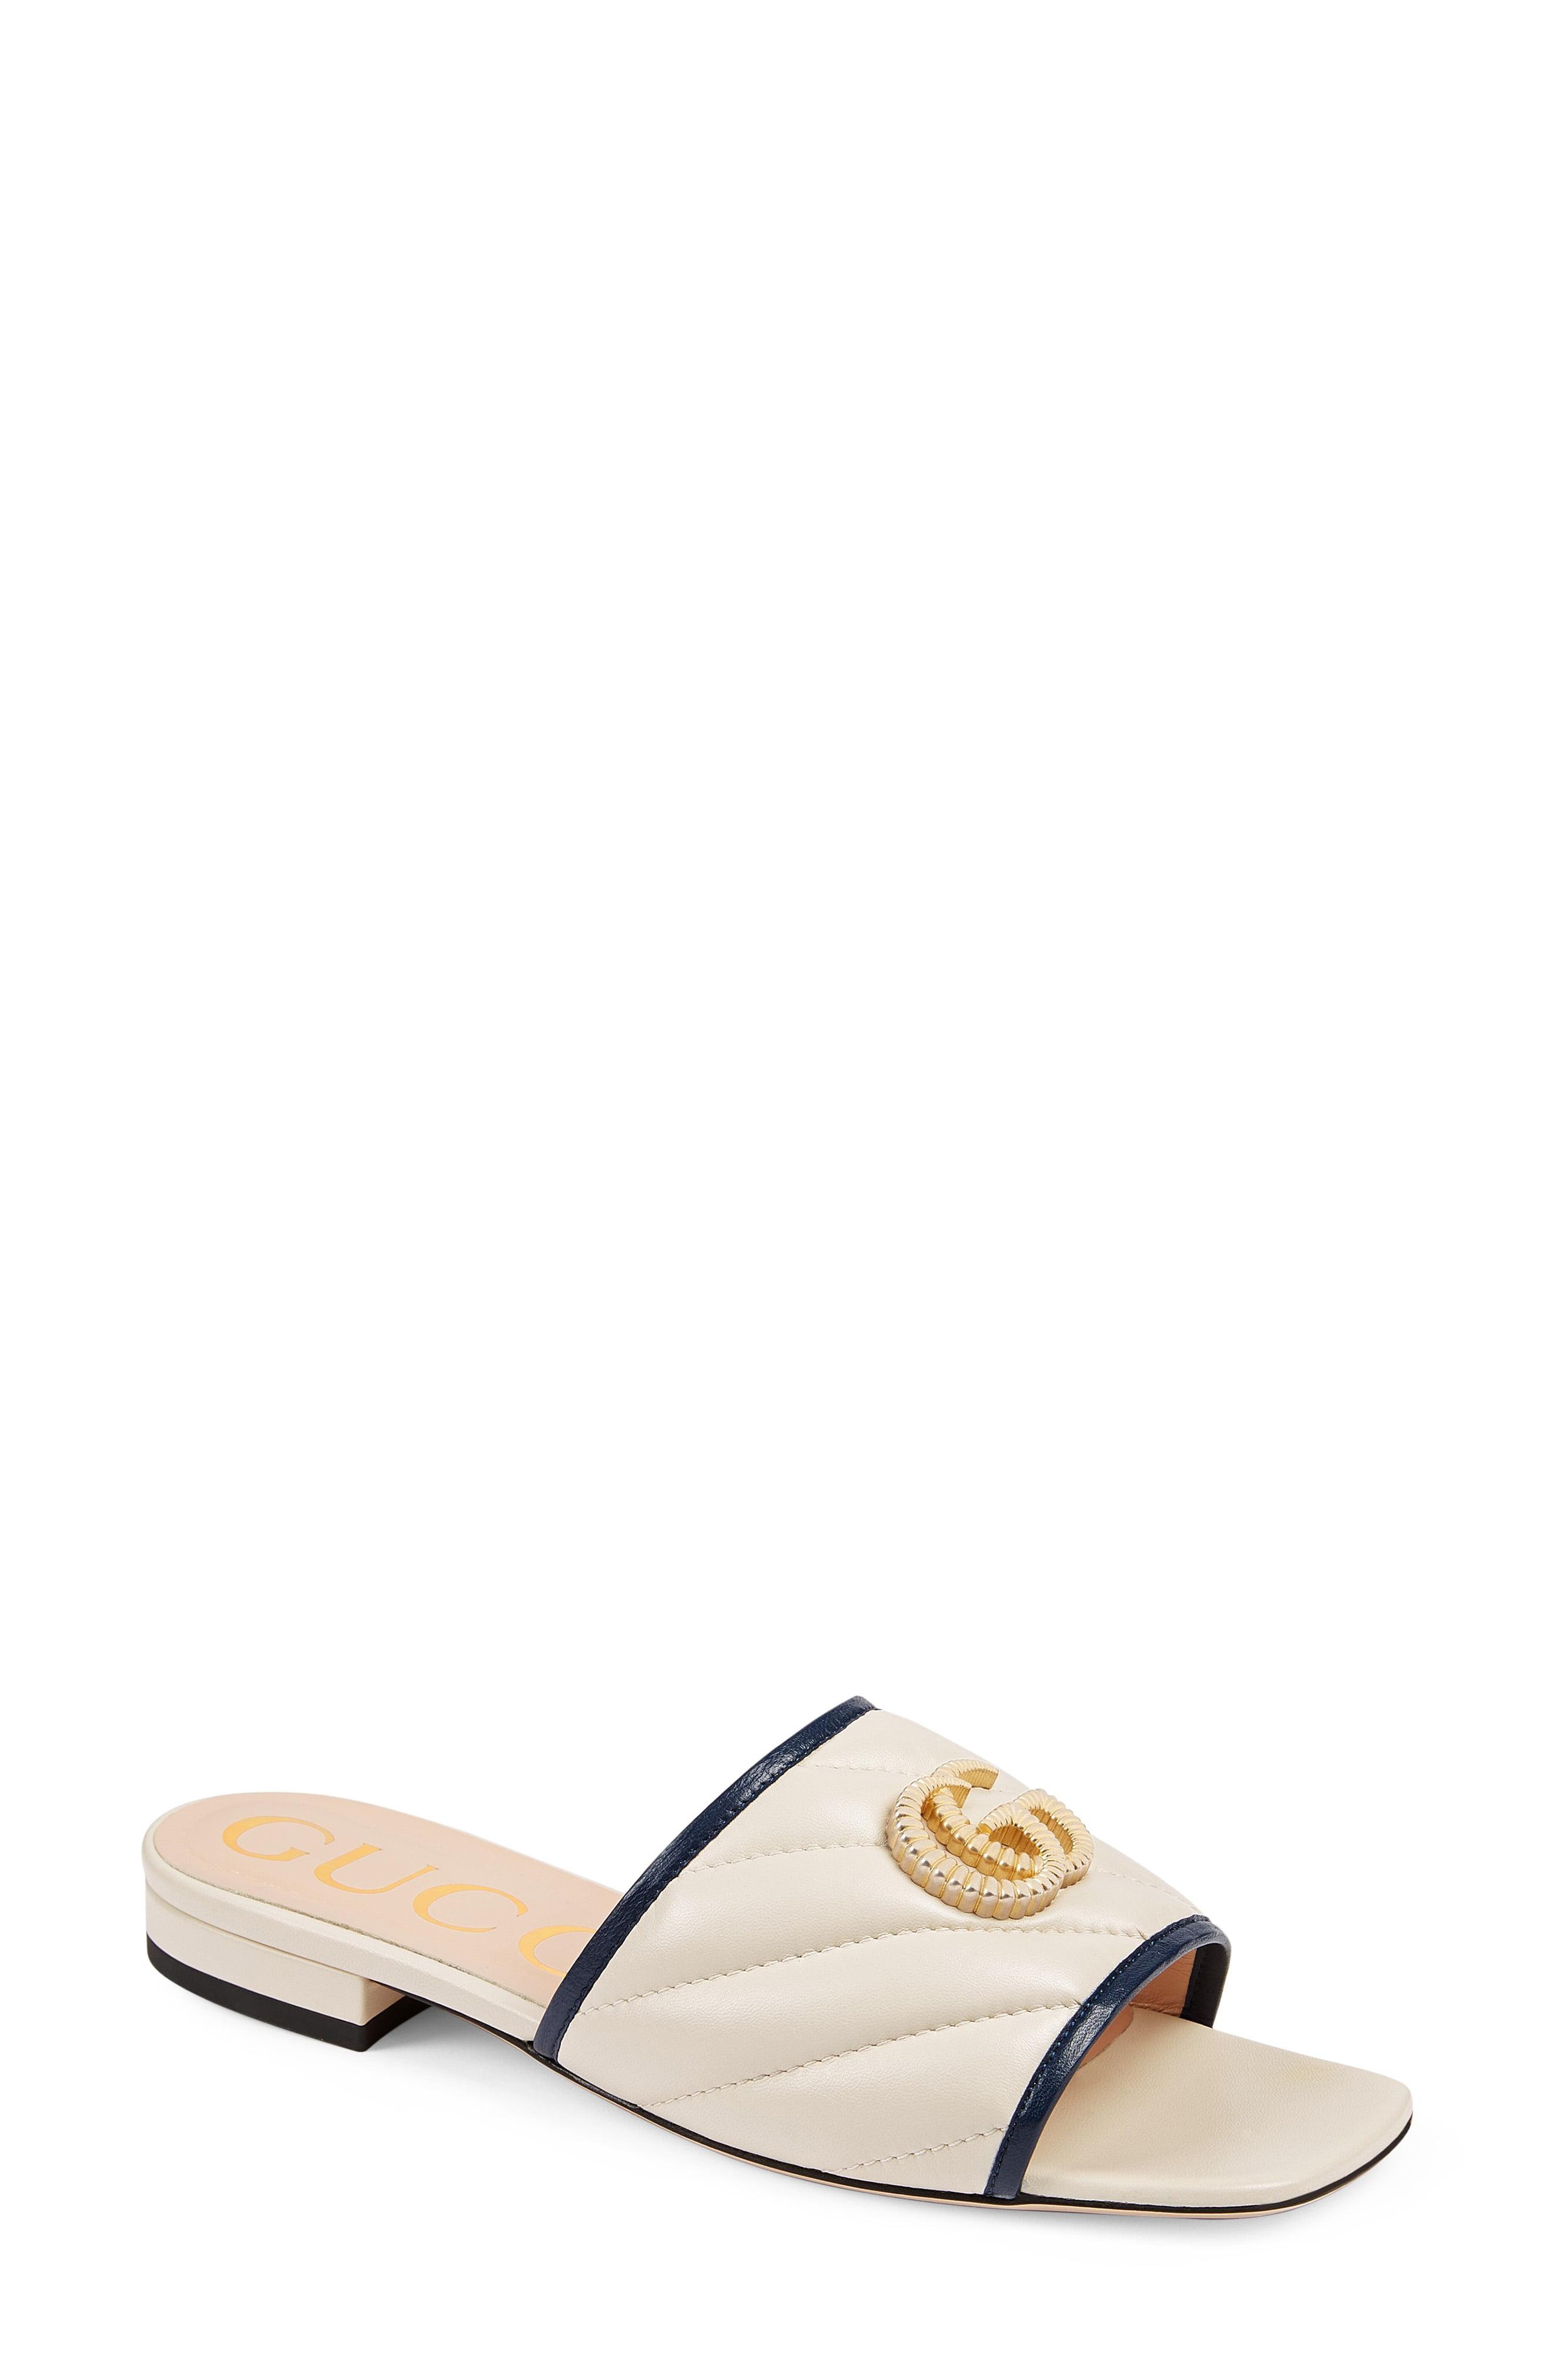 Gucci Leather Jolie Slides in White | Lyst